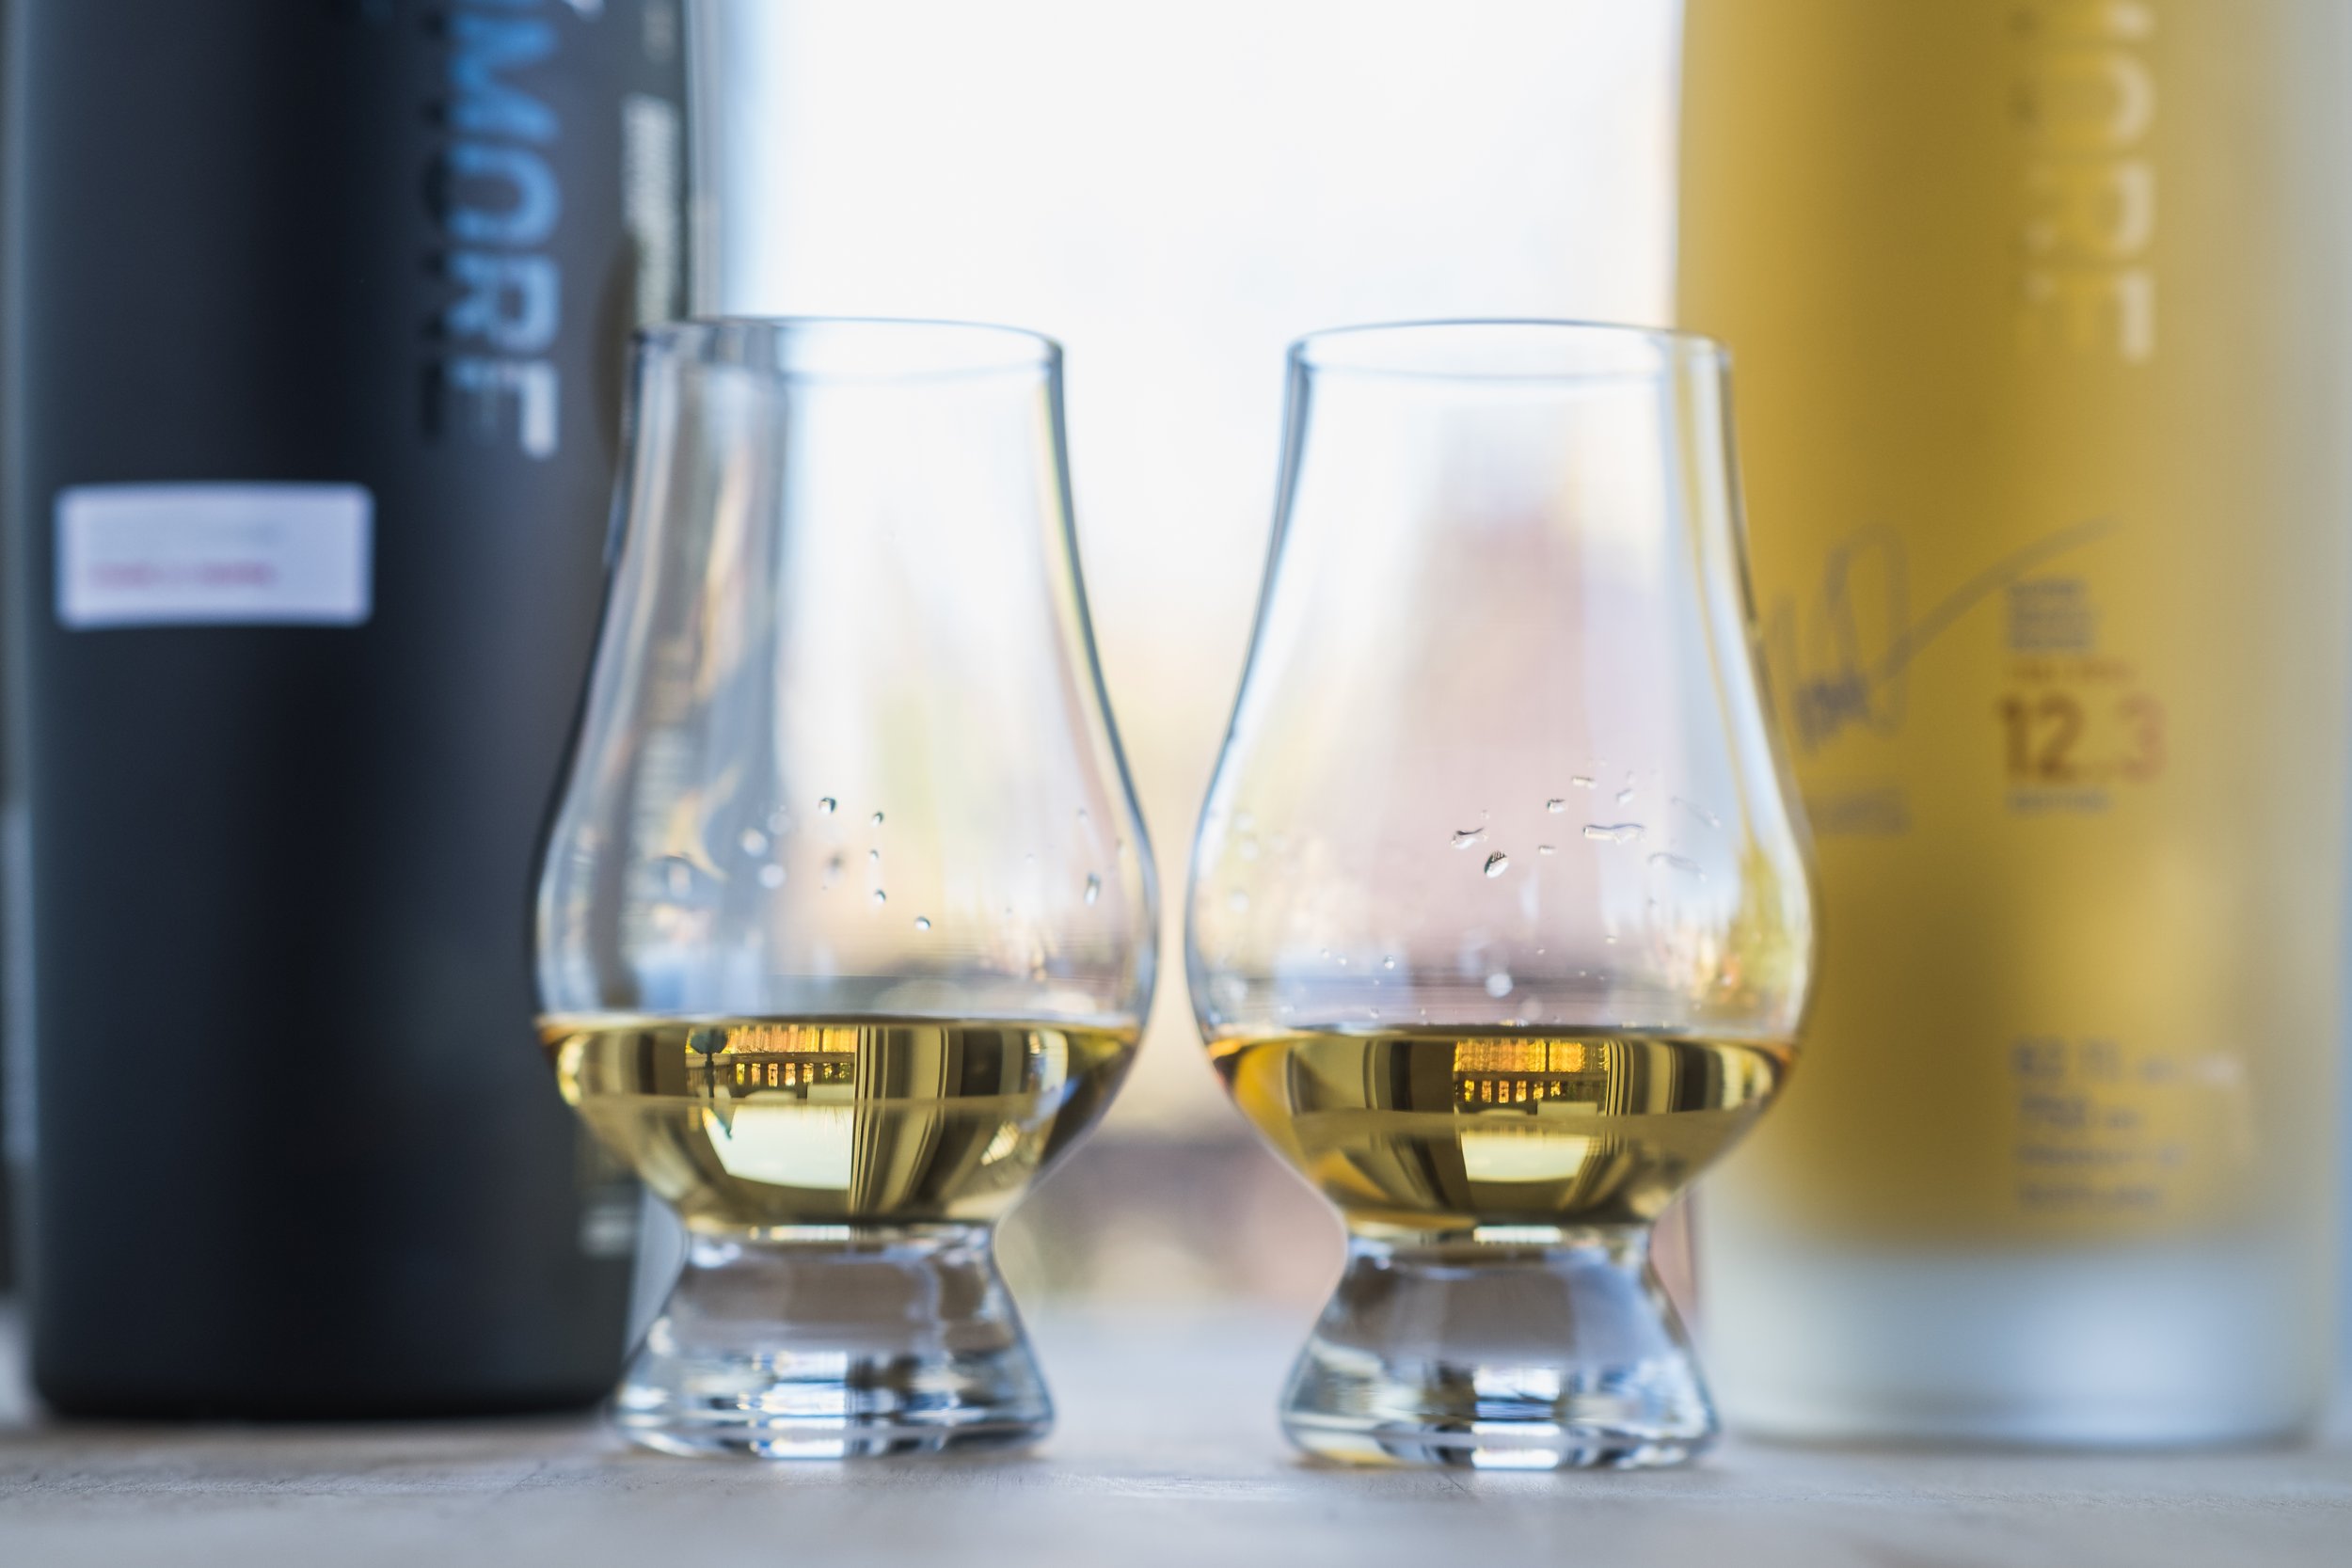 Octomore_11.1 and 12.3_02.jpg